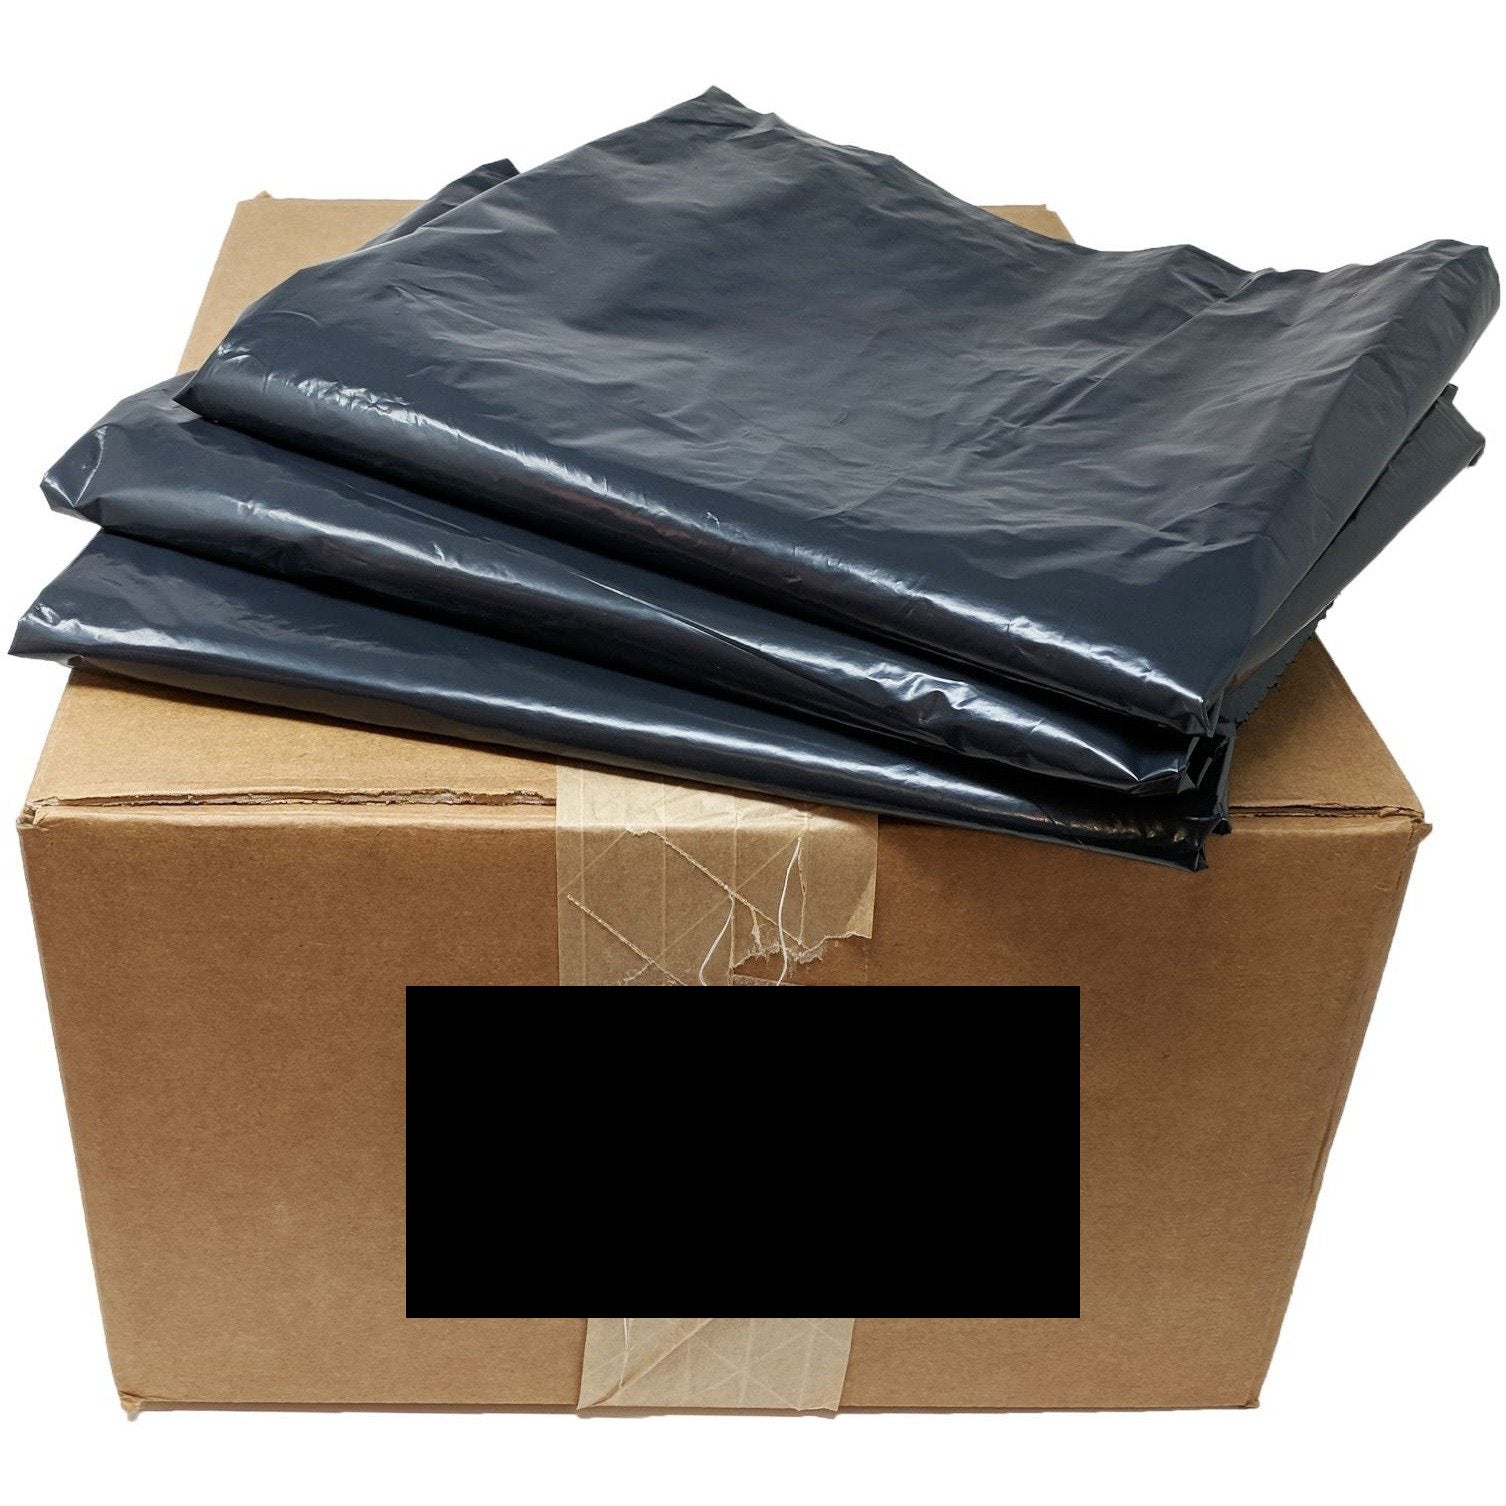 JSP Heavy Duty Black Contractor Bags 3 Mil (20 Per Box) - Celtic Building  Supplies | Yonkers NY